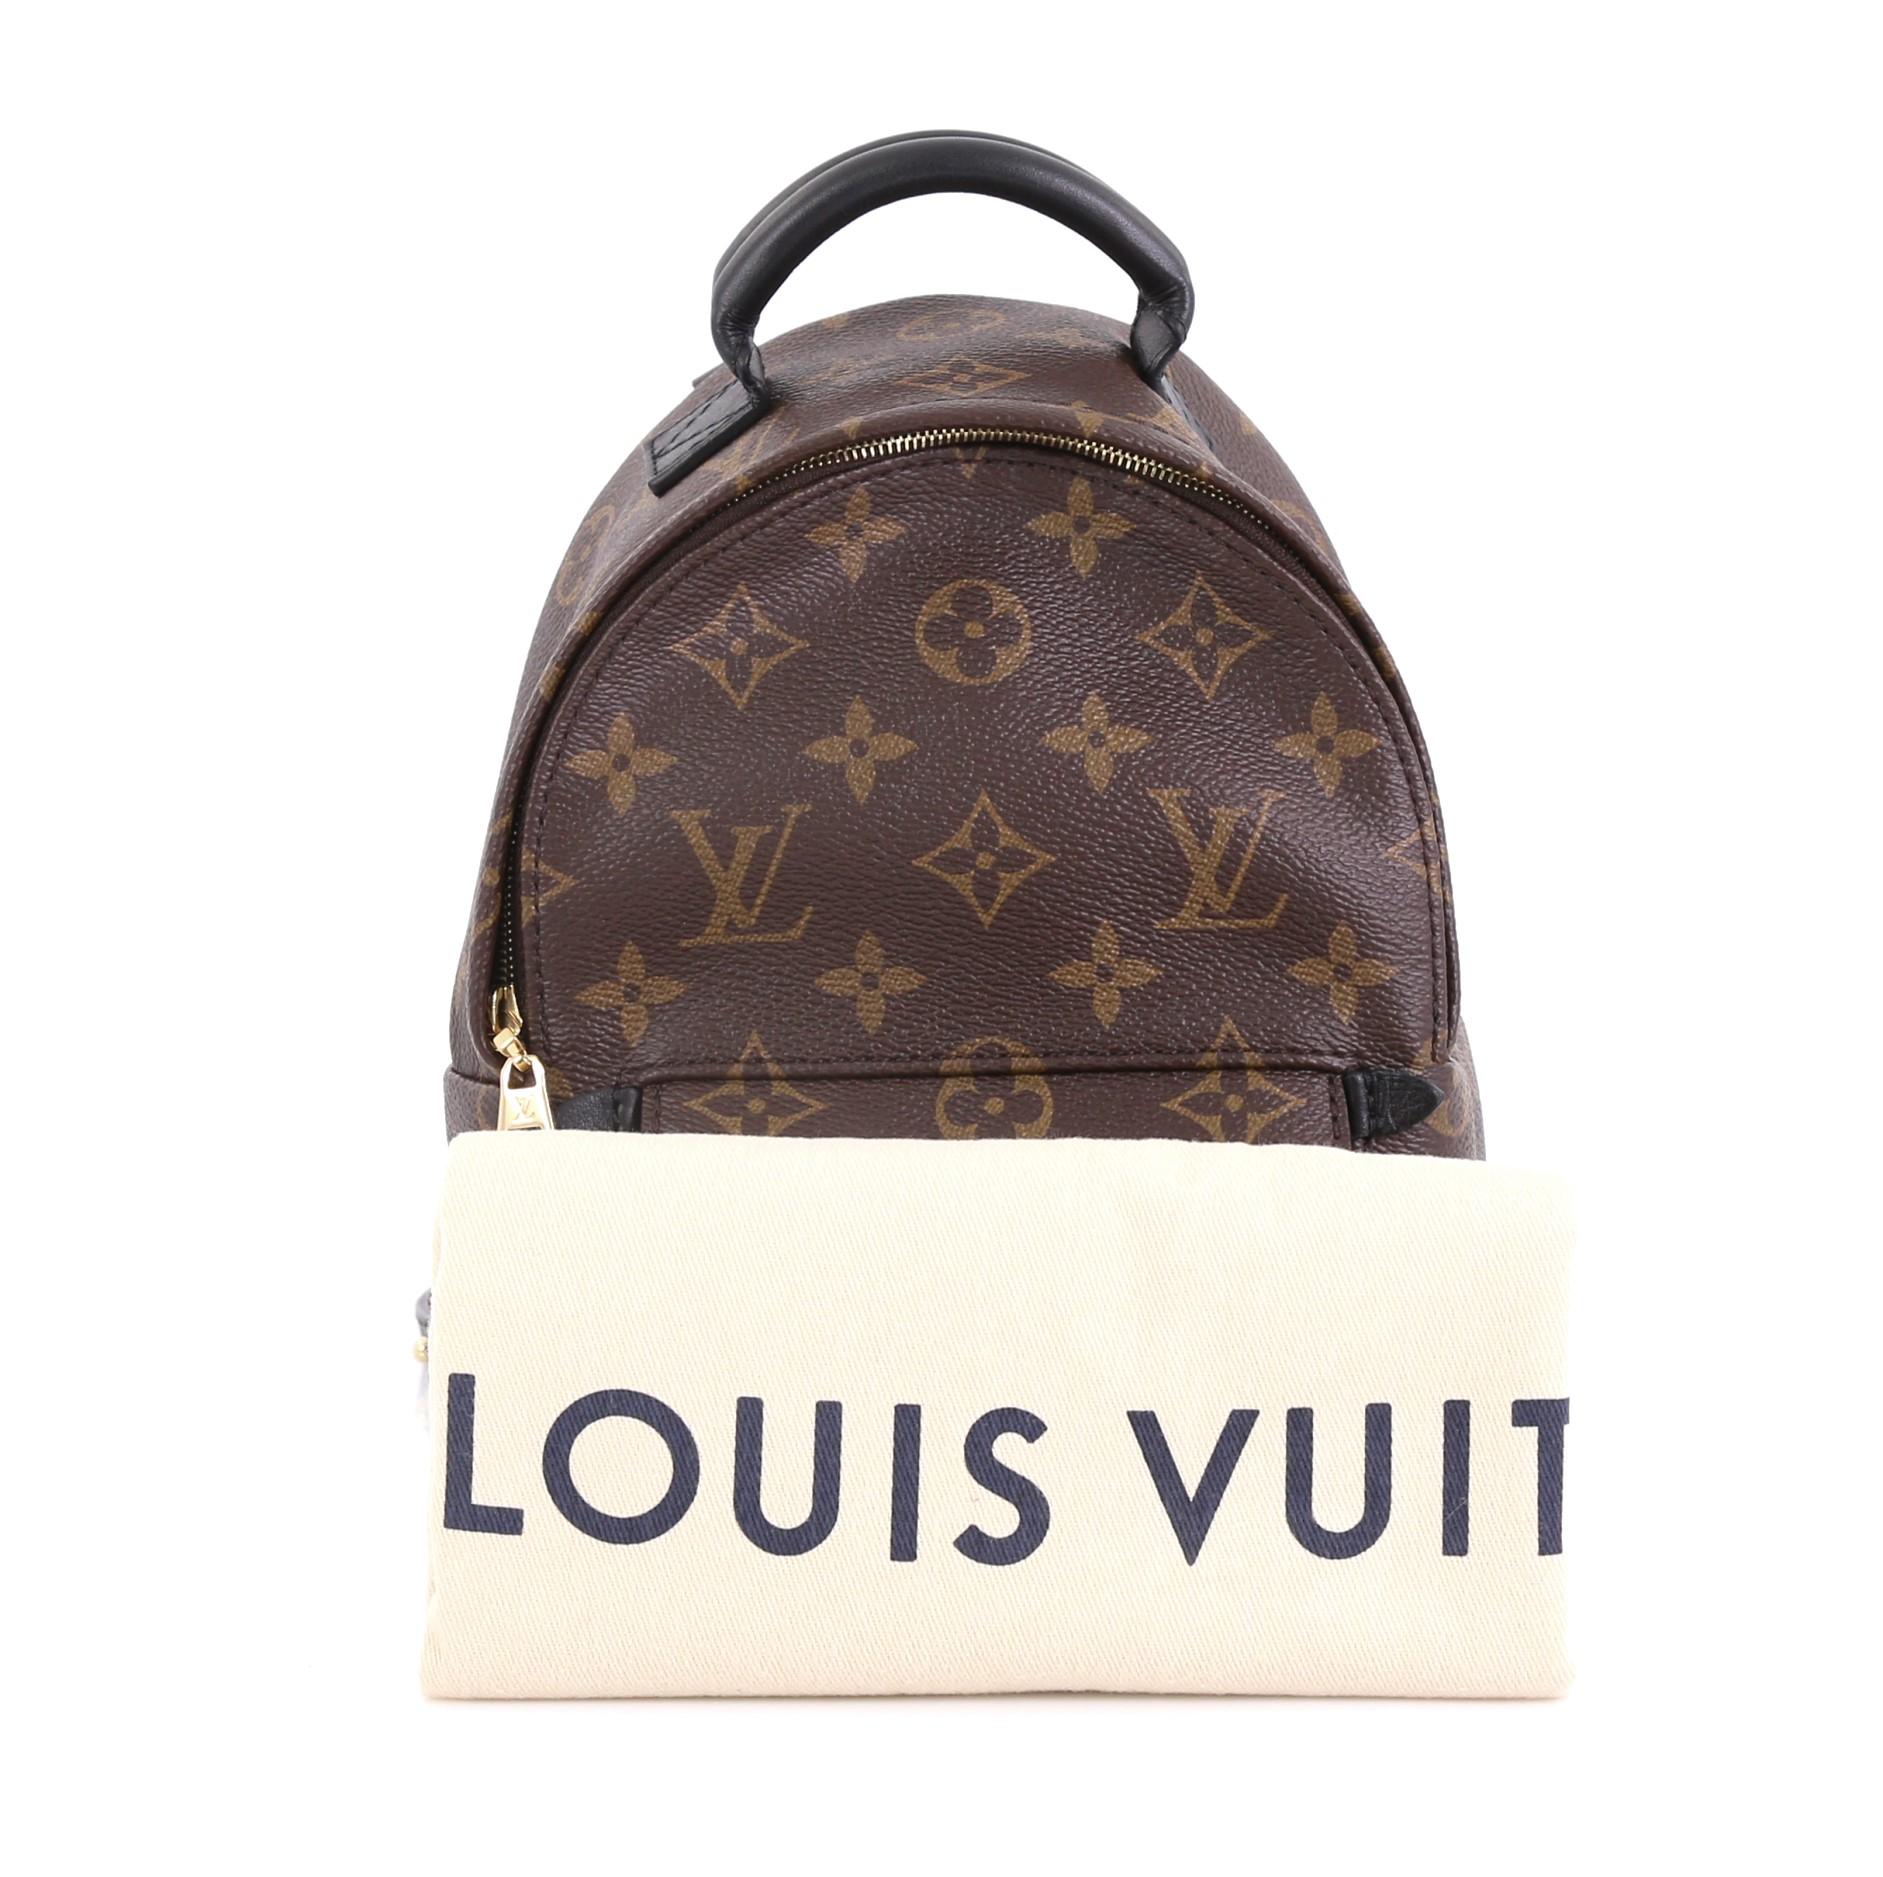 This Louis Vuitton Palm Springs Backpack Monogram Canvas Mini, crafted from brown monogram coated canvas, features a padded leather top handle, adjustable padded backpack shoulder straps, exterior front zip pocket, foam backing, and gold-tone